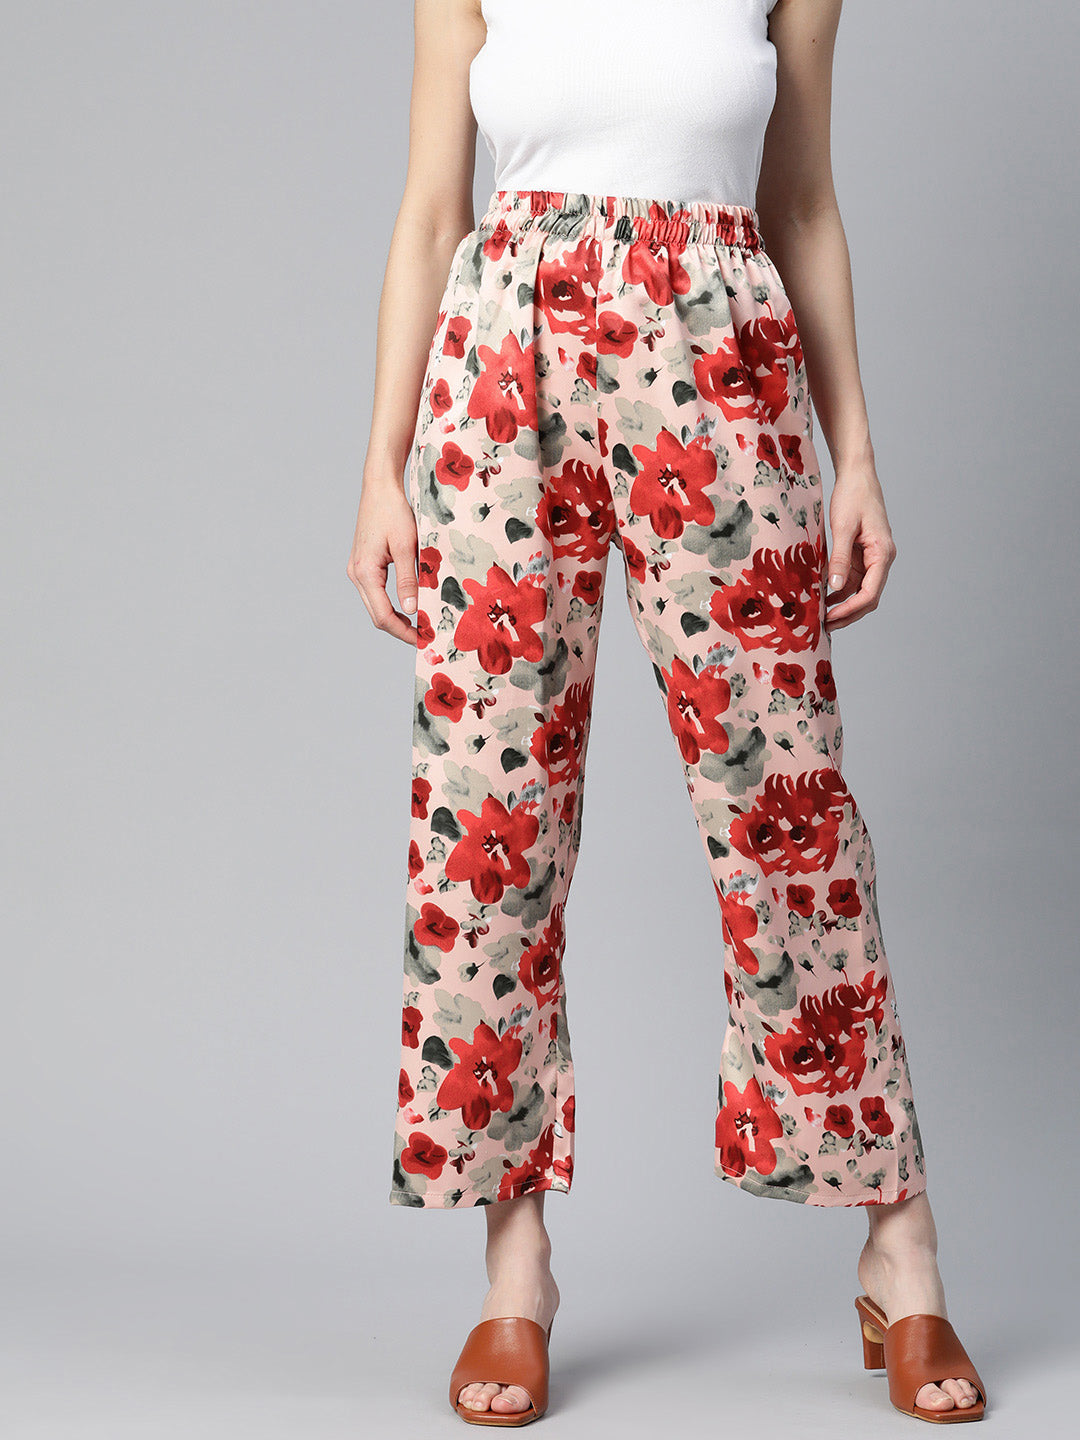 VIVICOLOR Women Summer High Waisted Palazzo Pants Floral Print Wide Leg Pant  Long Lounge Trousers at Amazon Women's Clothing store